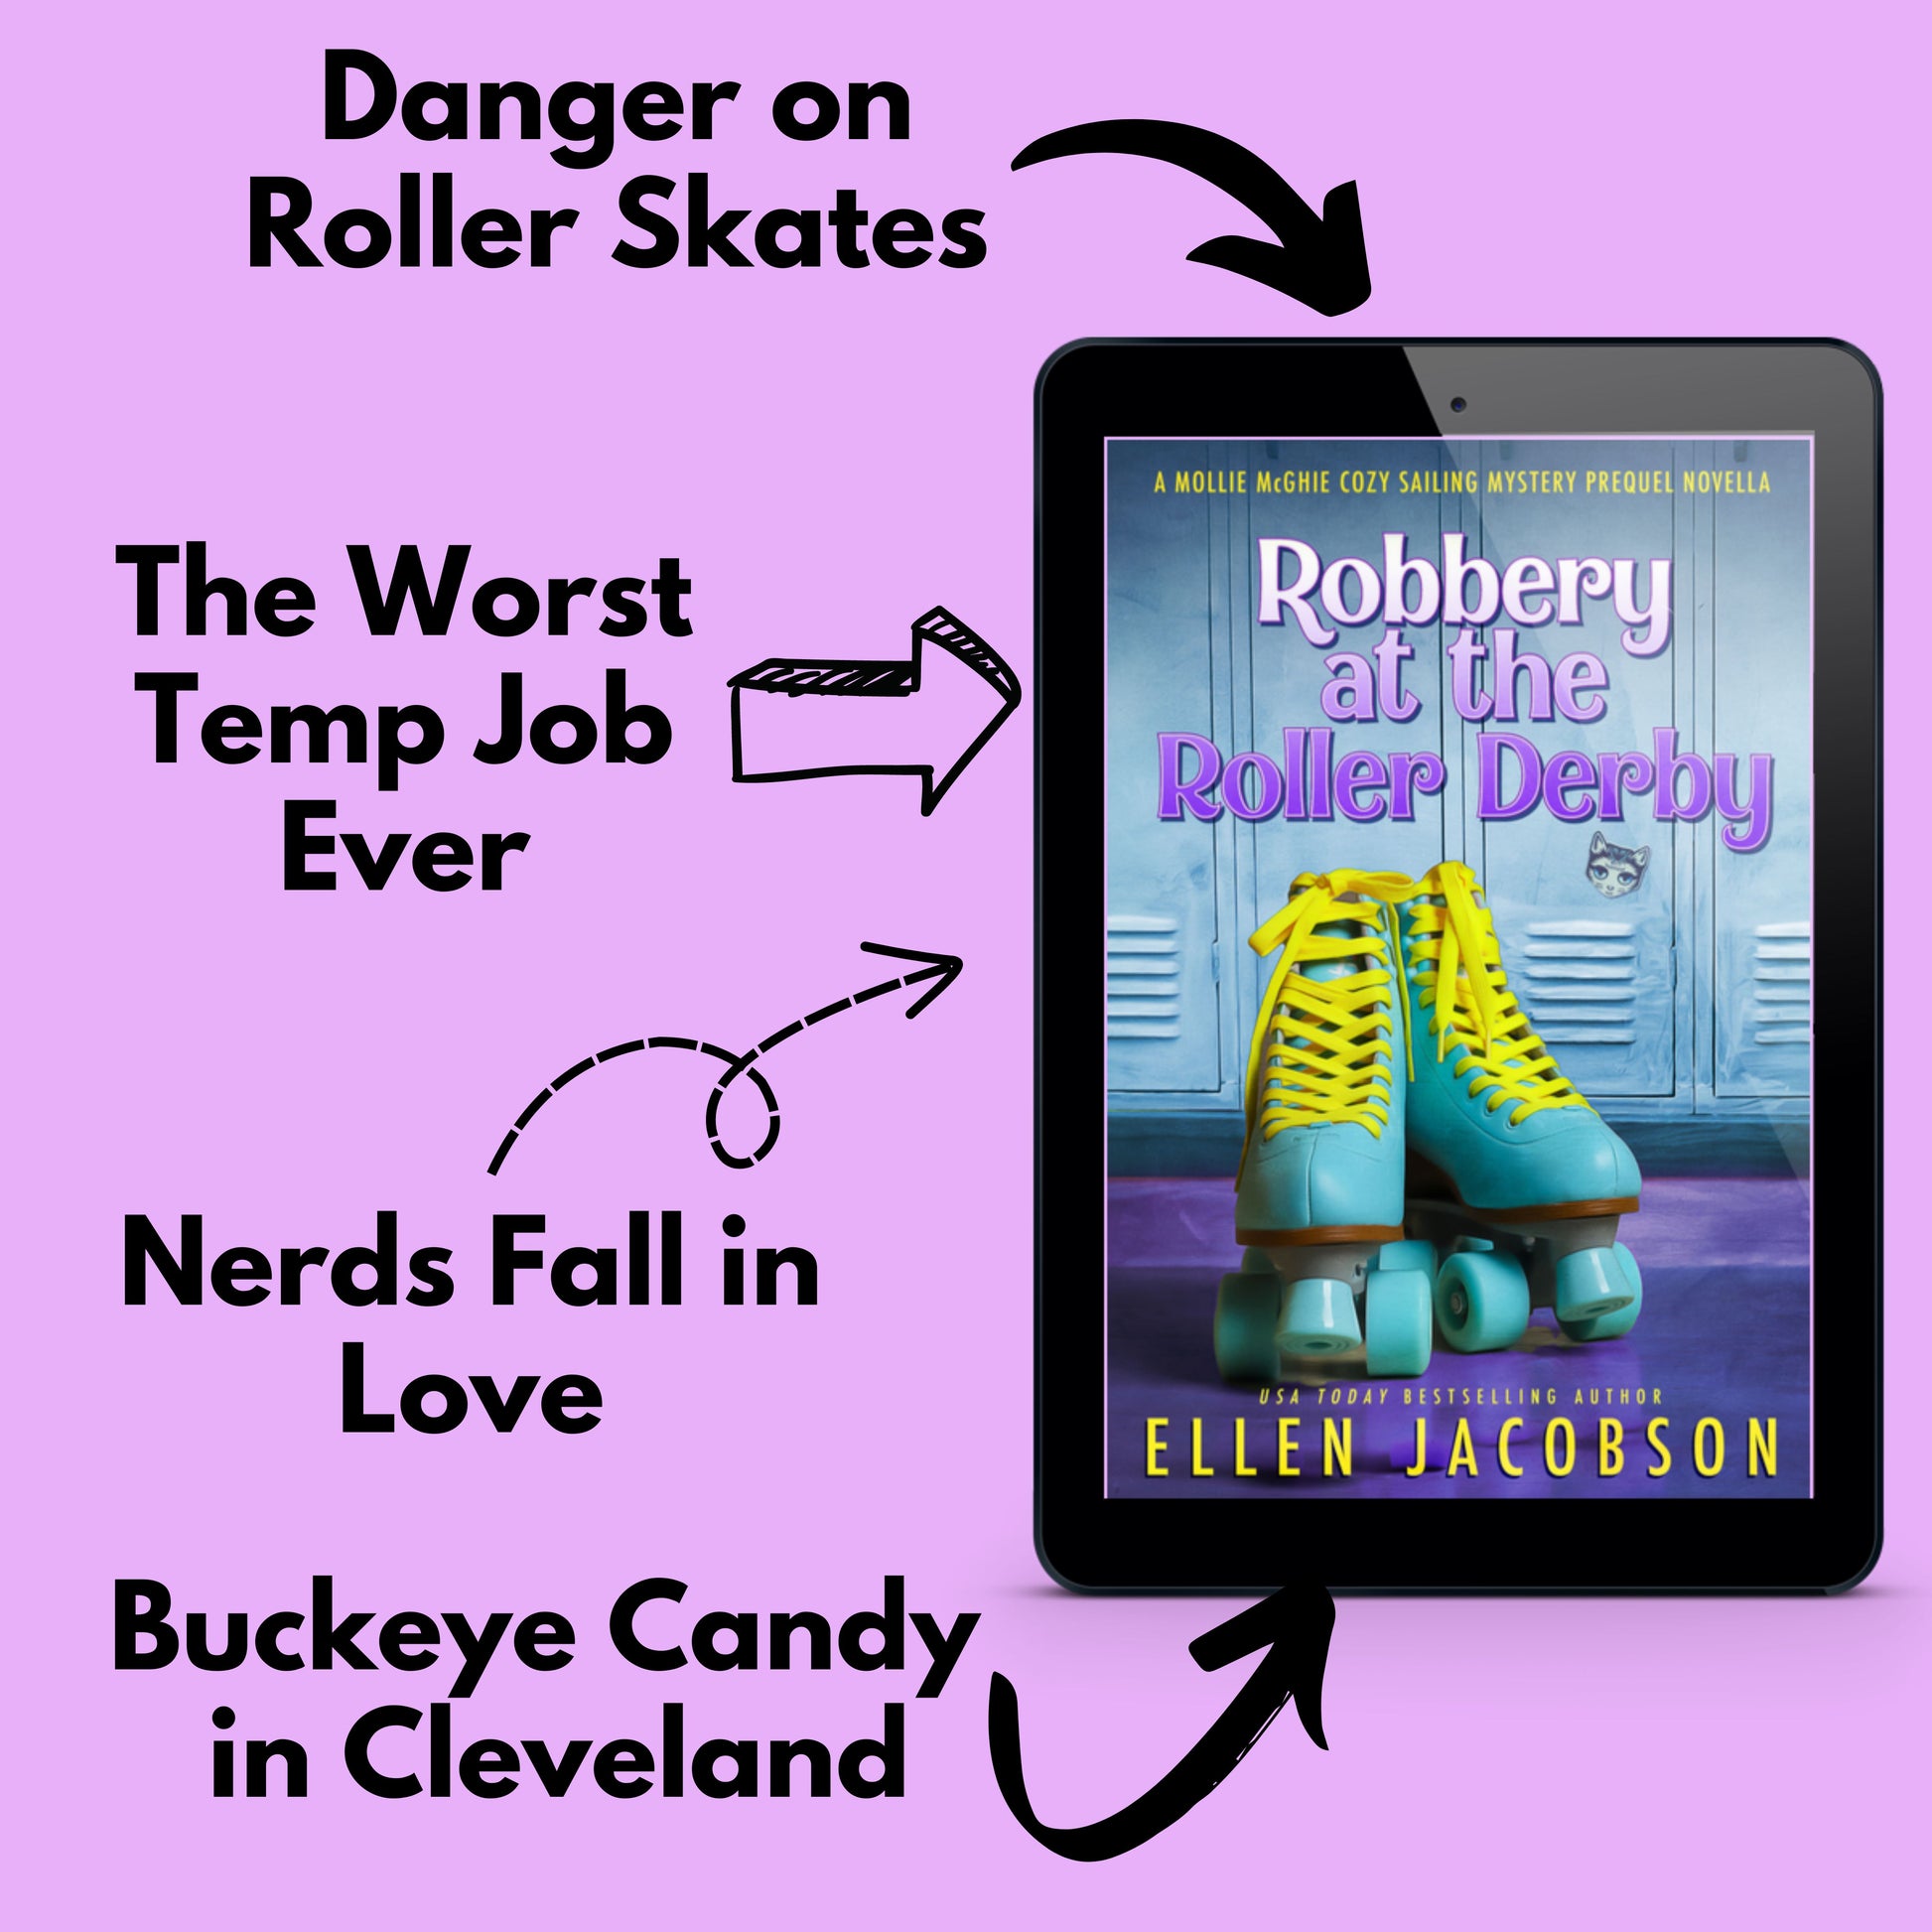 Robbery at the Roller Derby (Mollie McGhie Cozy Mystery Prequel) ebook cover with text that says danger on roller skates, the worst temp job ever, nerds fall in love, and buckeye candy in Cleveland